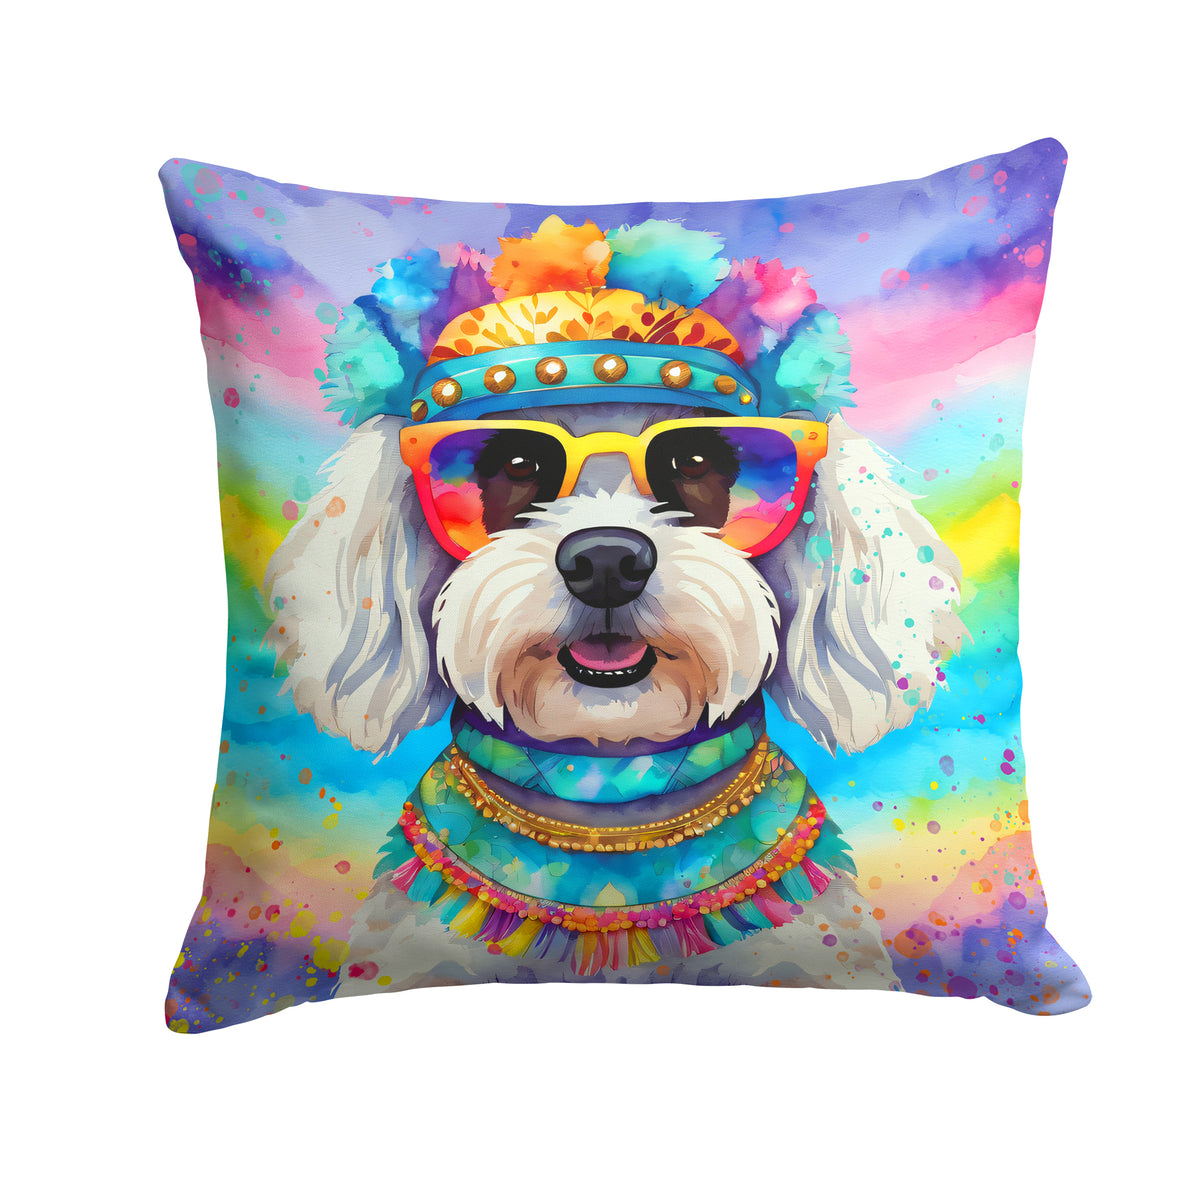 Buy this Bichon Frise Hippie Dawg Fabric Decorative Pillow